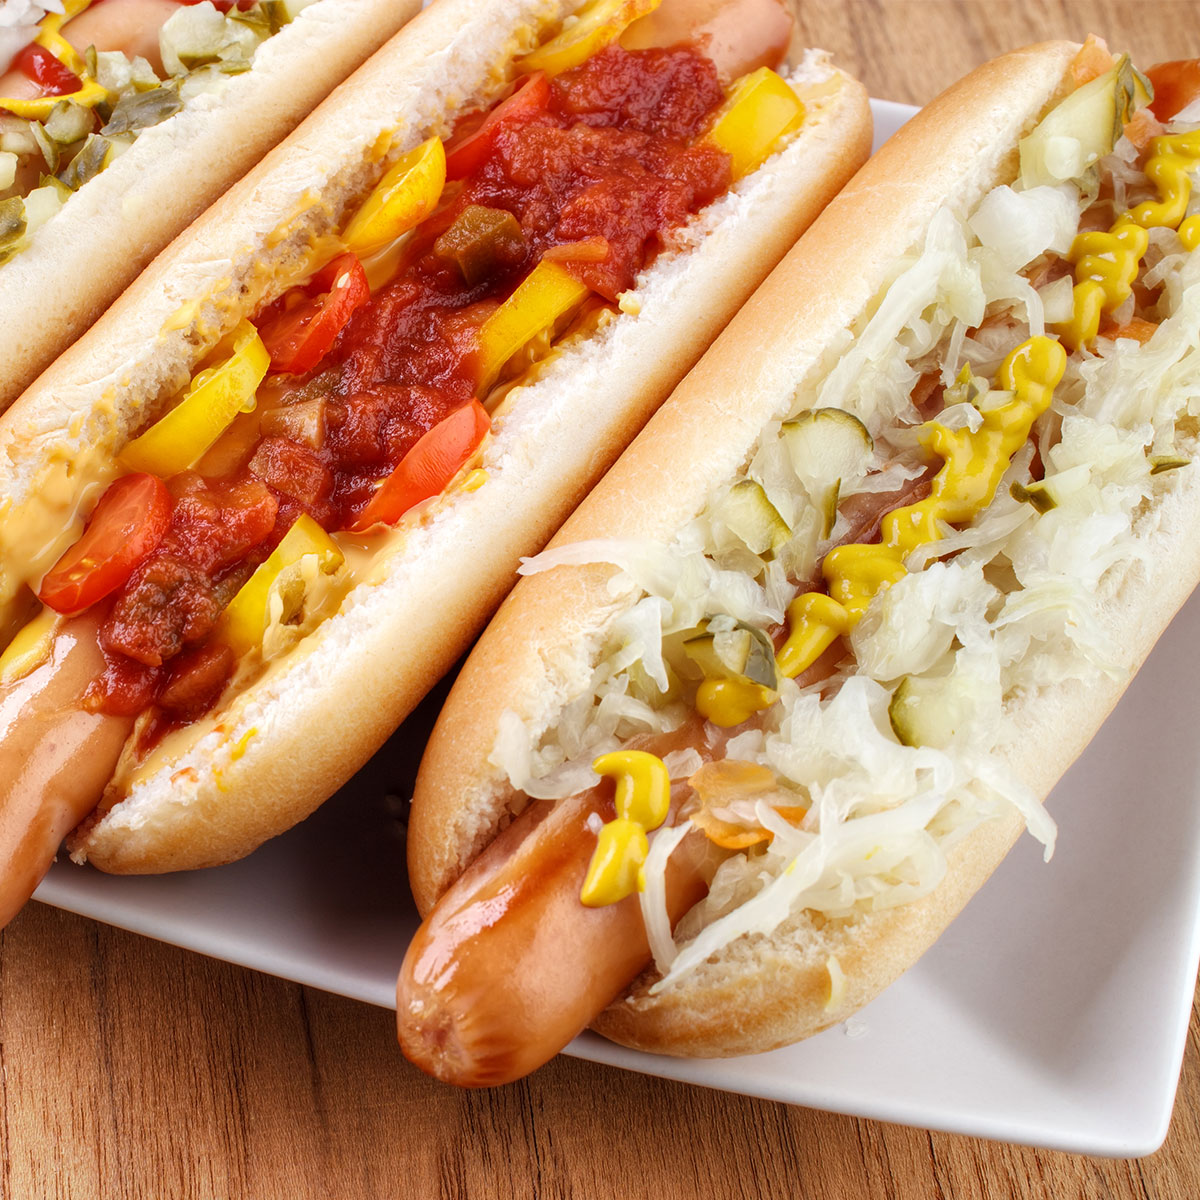 hot dogs with toppings like sauerkraut